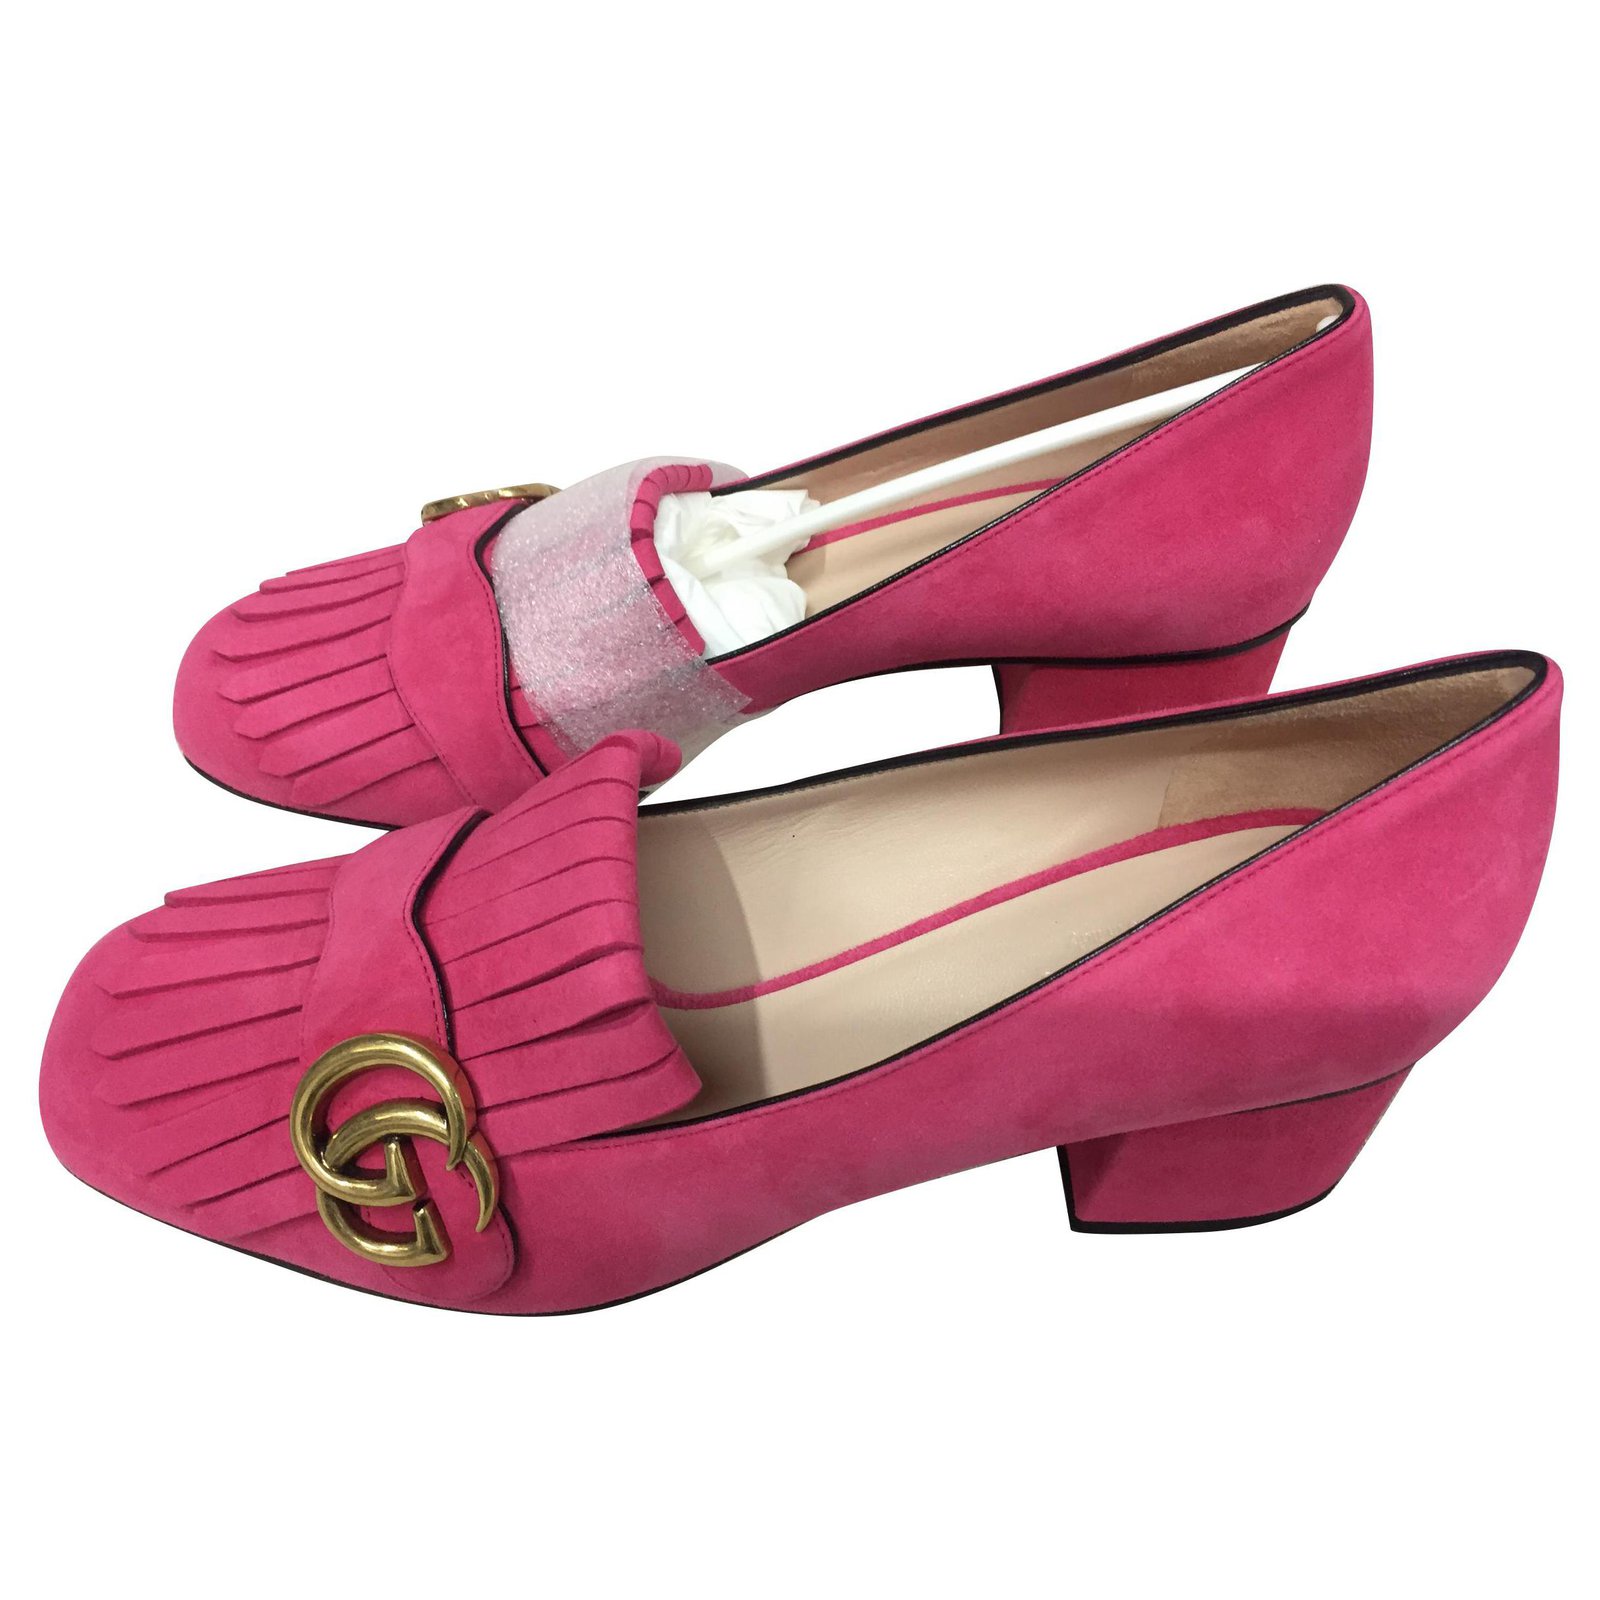 Gucci Marmont gucci Heels Suede Pink 